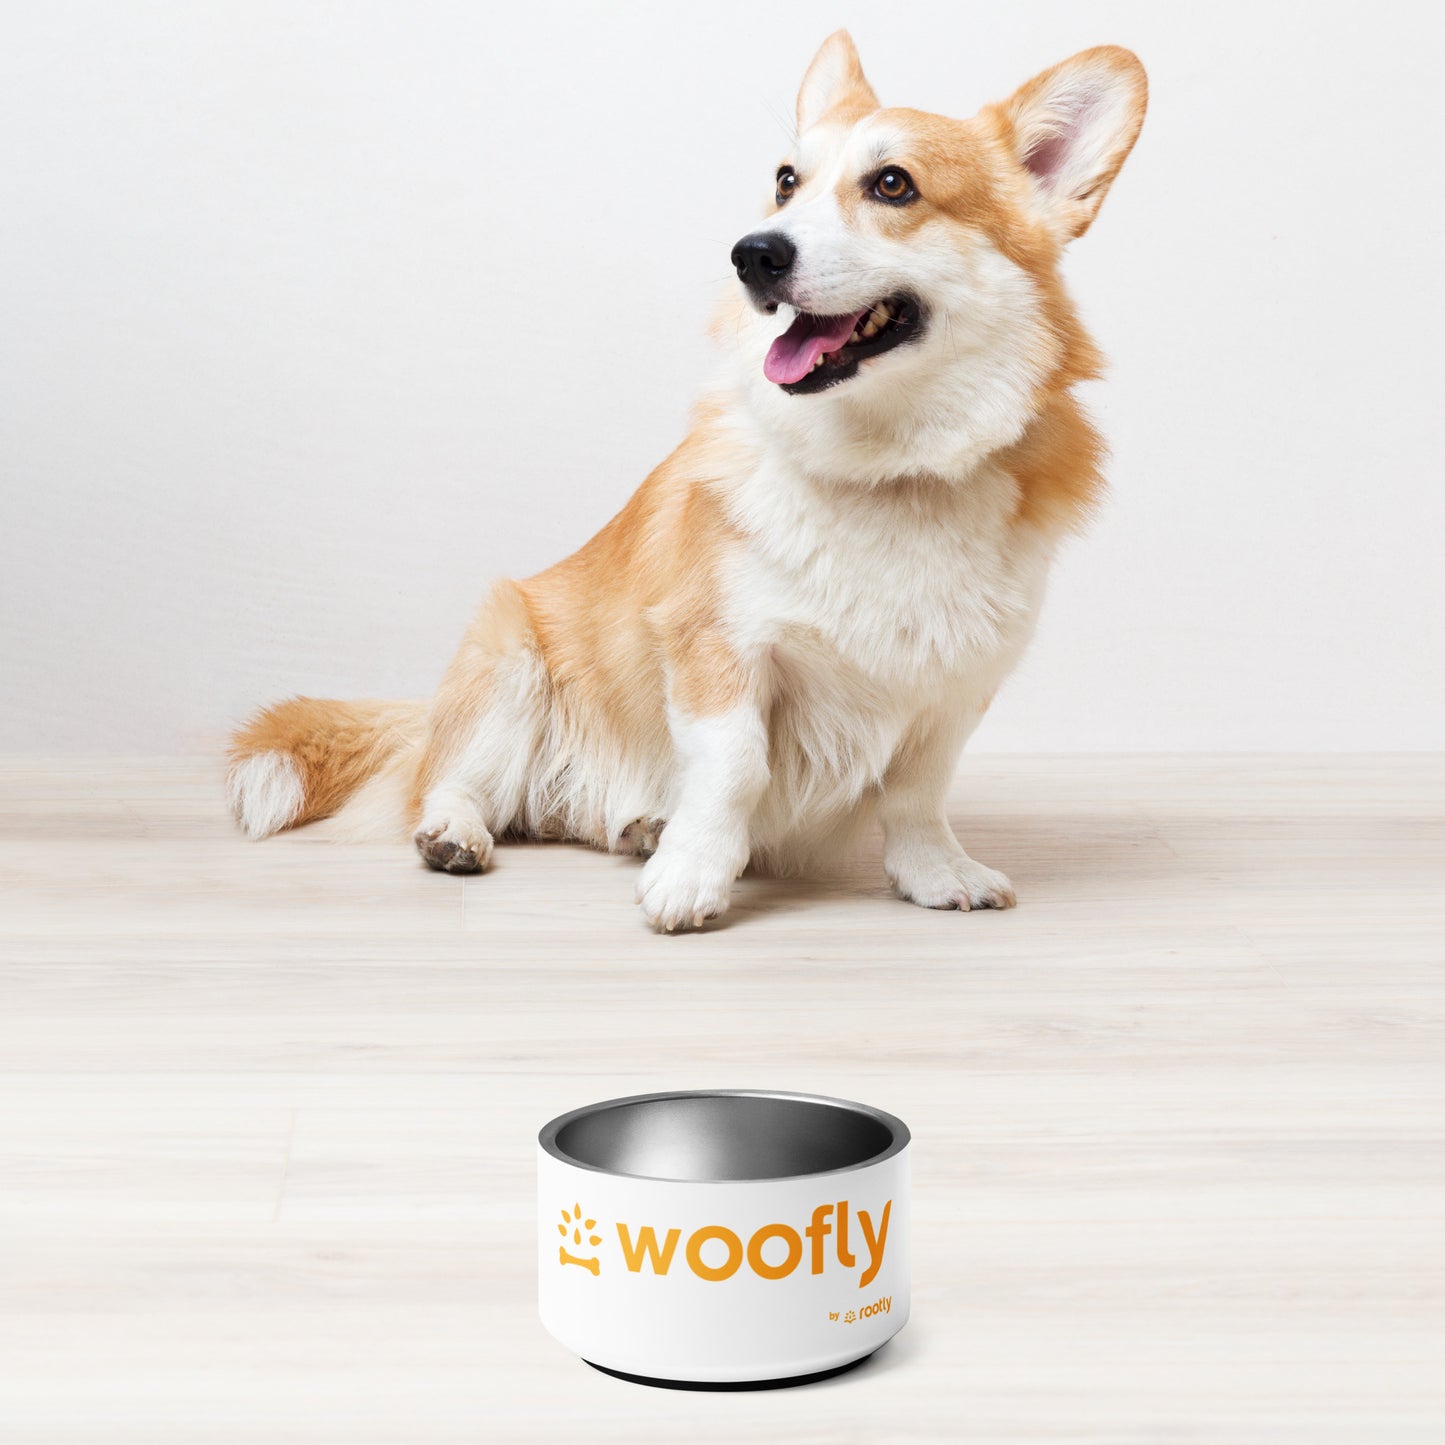 Woofly (by Rootly) Pet Bowl